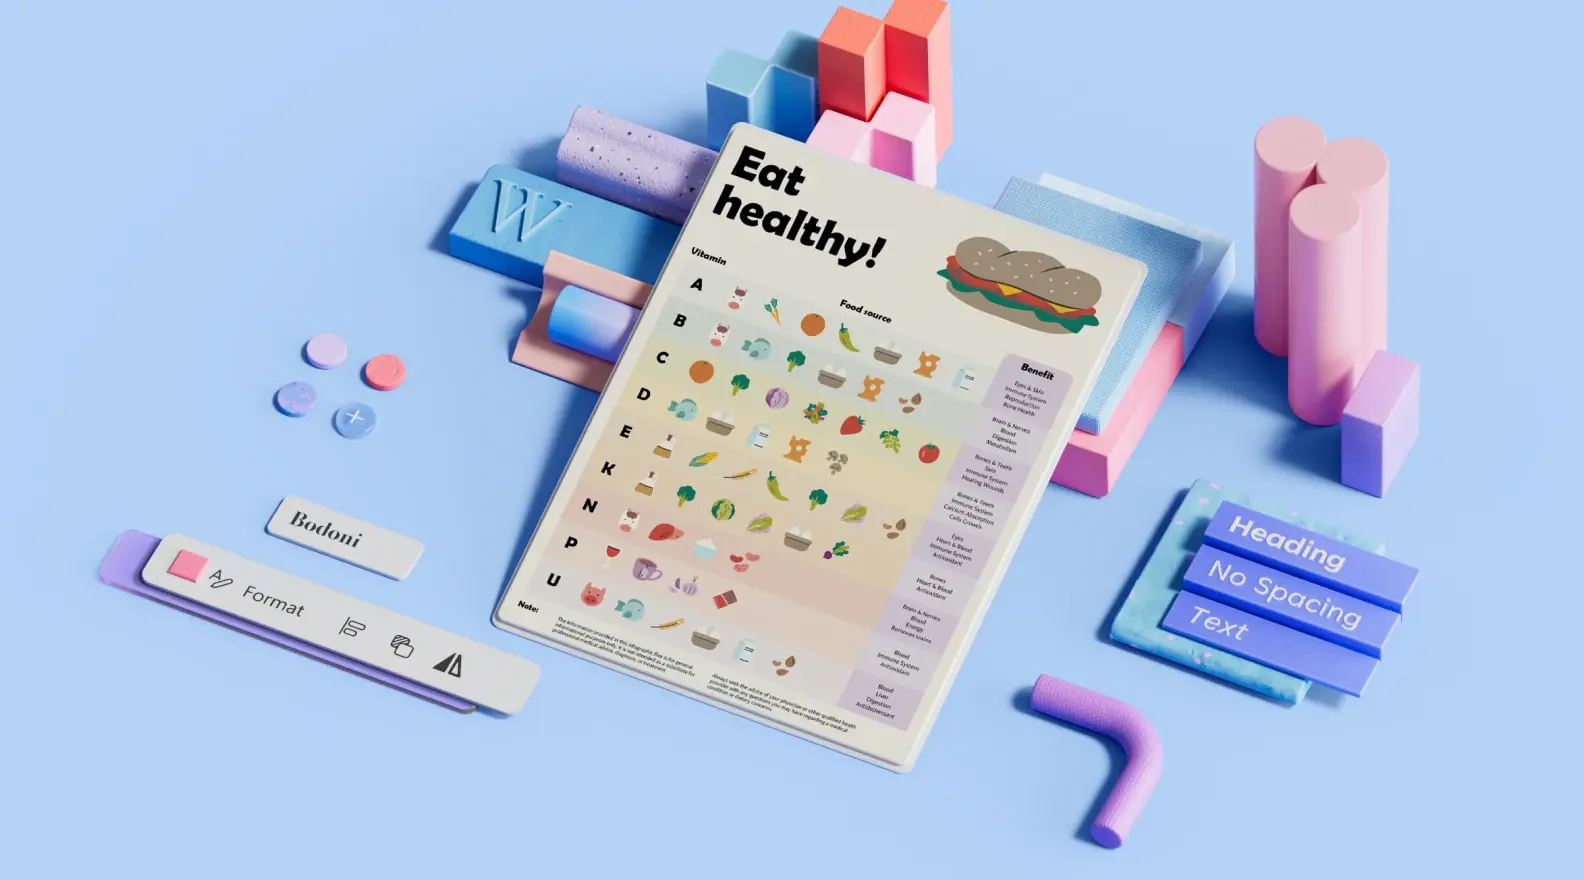 Eat healthy food poster template surrounded by 3D design elements